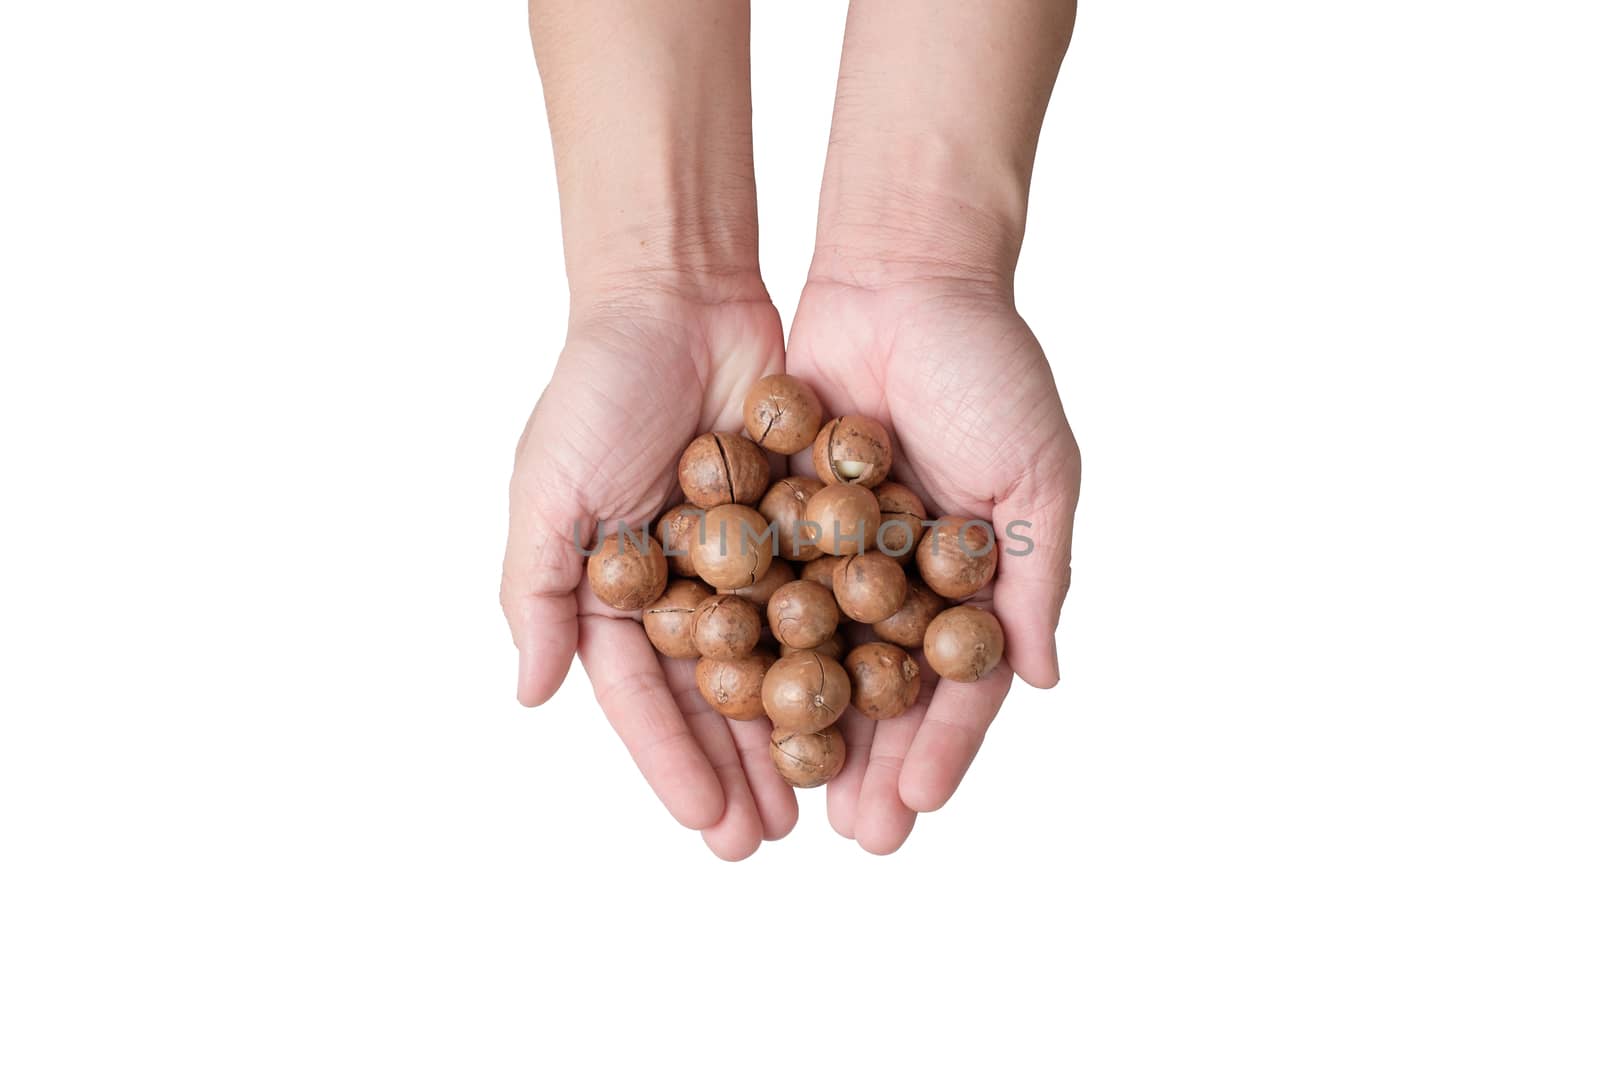 Two hands holding macadamia nuts in isolate photo.